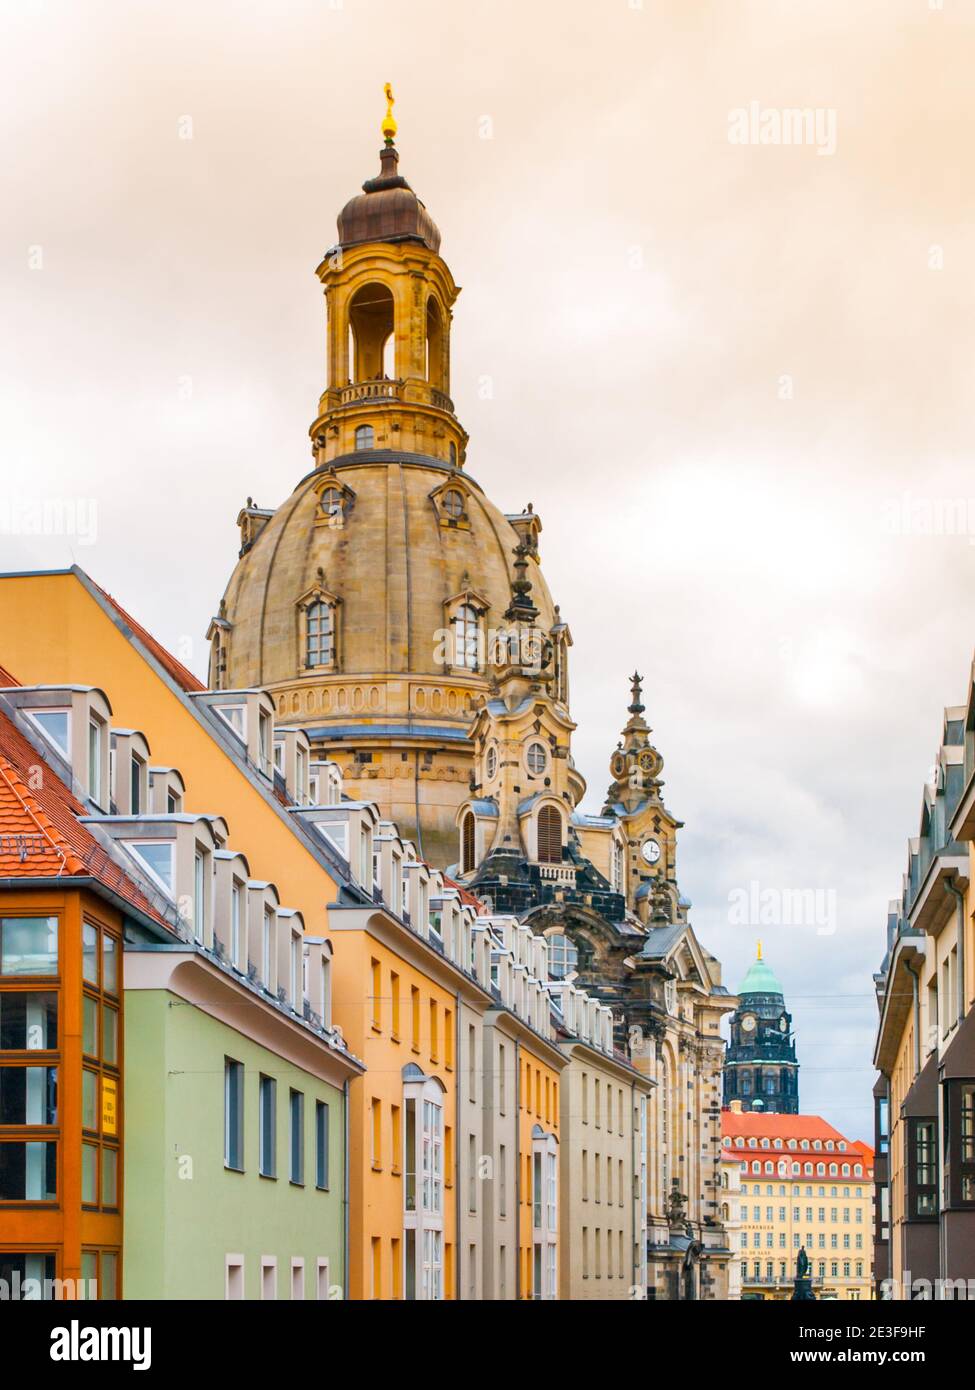 Dome of Dresden Frauenkirche behind buildings of Old Town, Germany Stock Photo